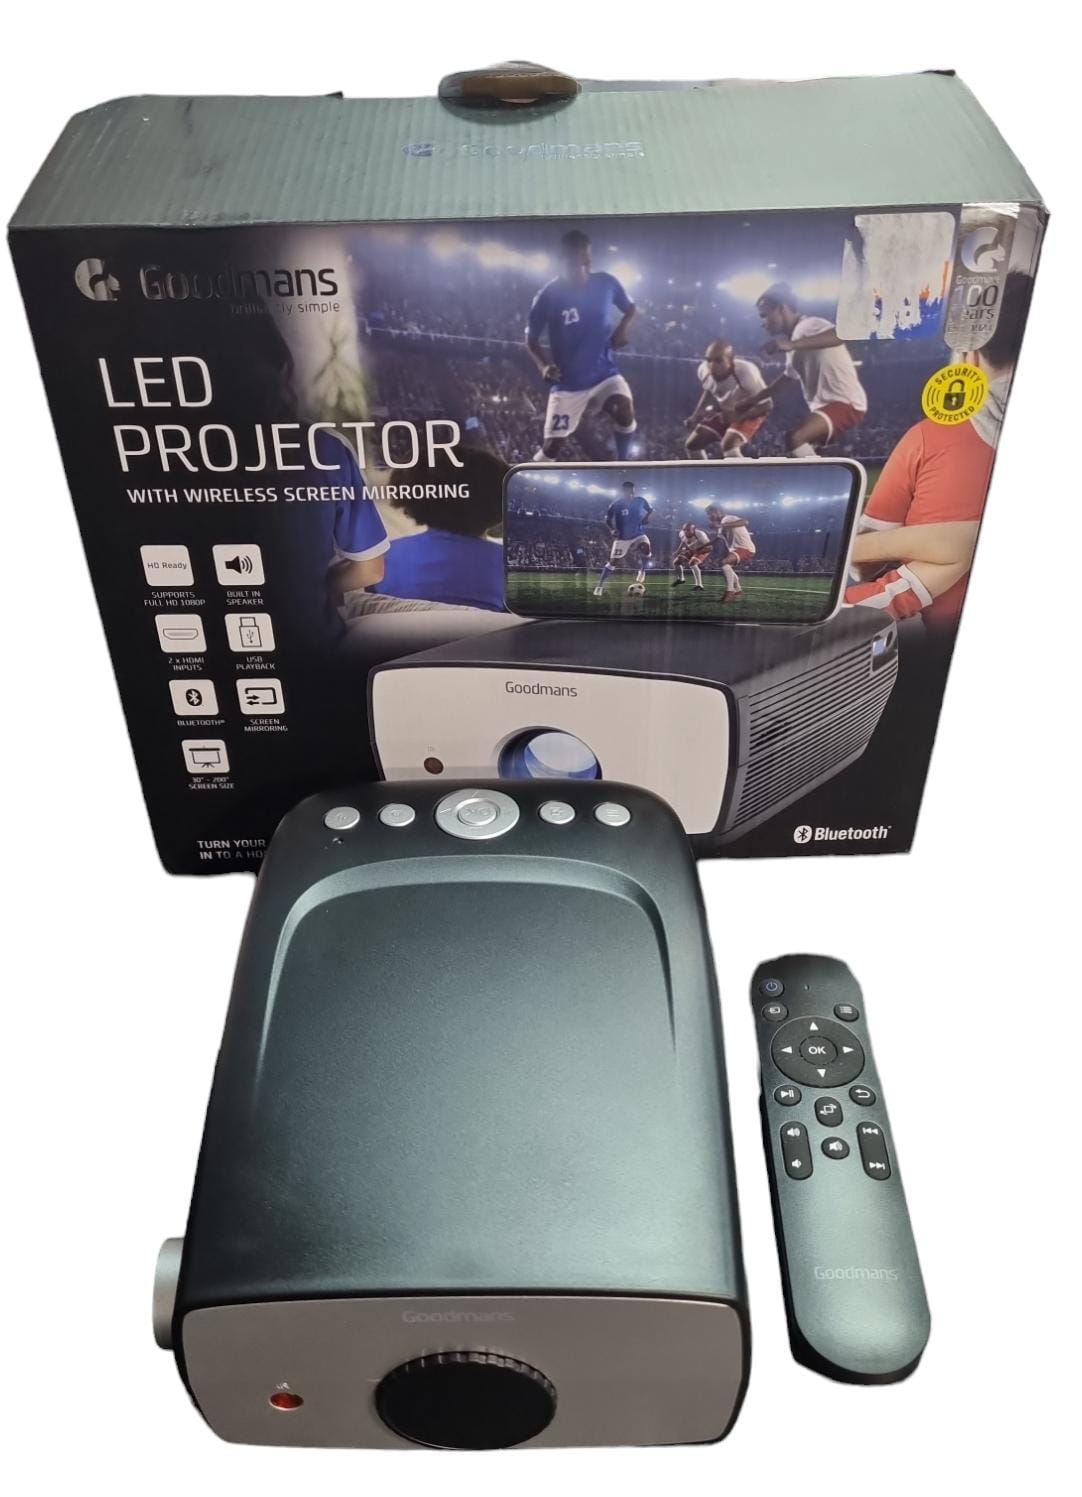 Goodmans LED Projector with wireless screen mirroring - Model 398855 - Boxed